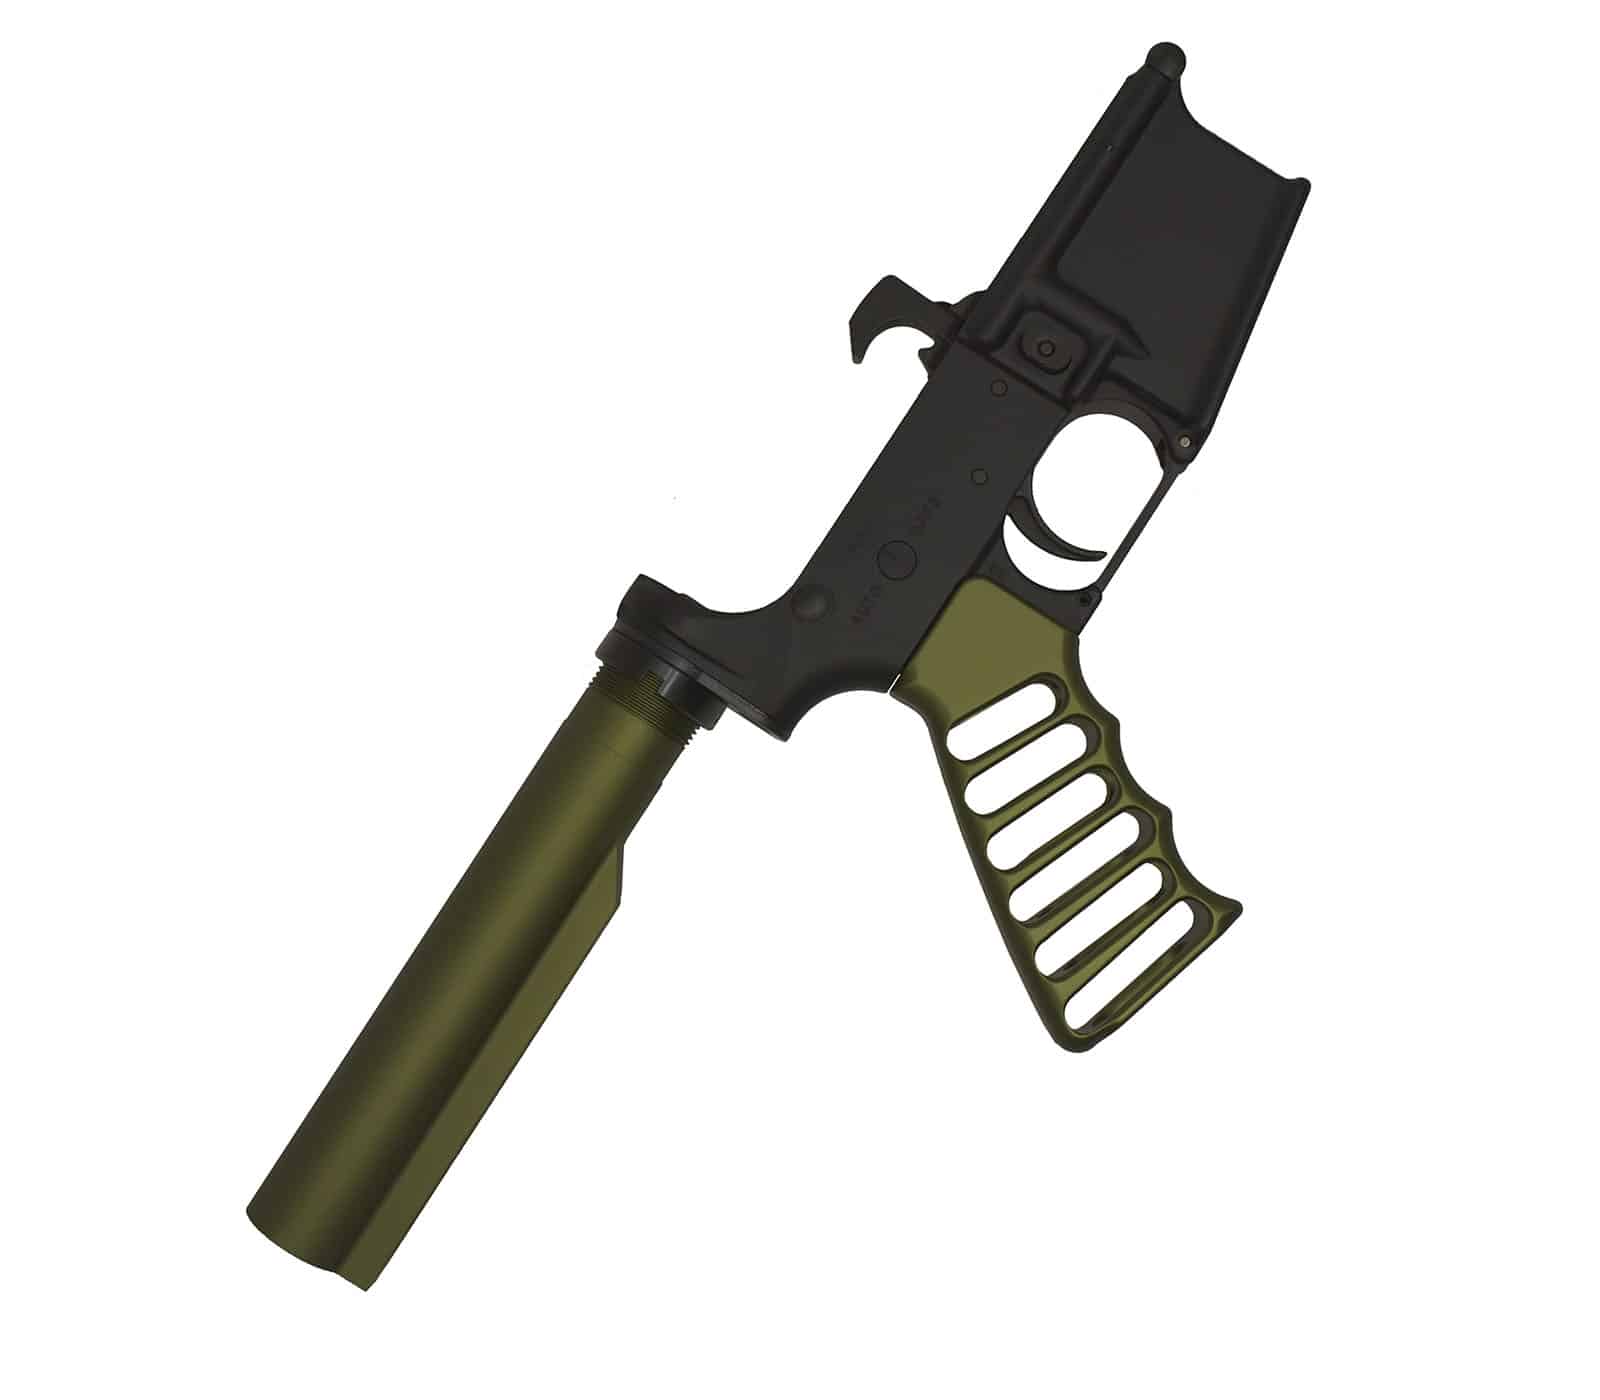 AR Universal Lower Receiver with Skeletonized Grip in Anodized Green